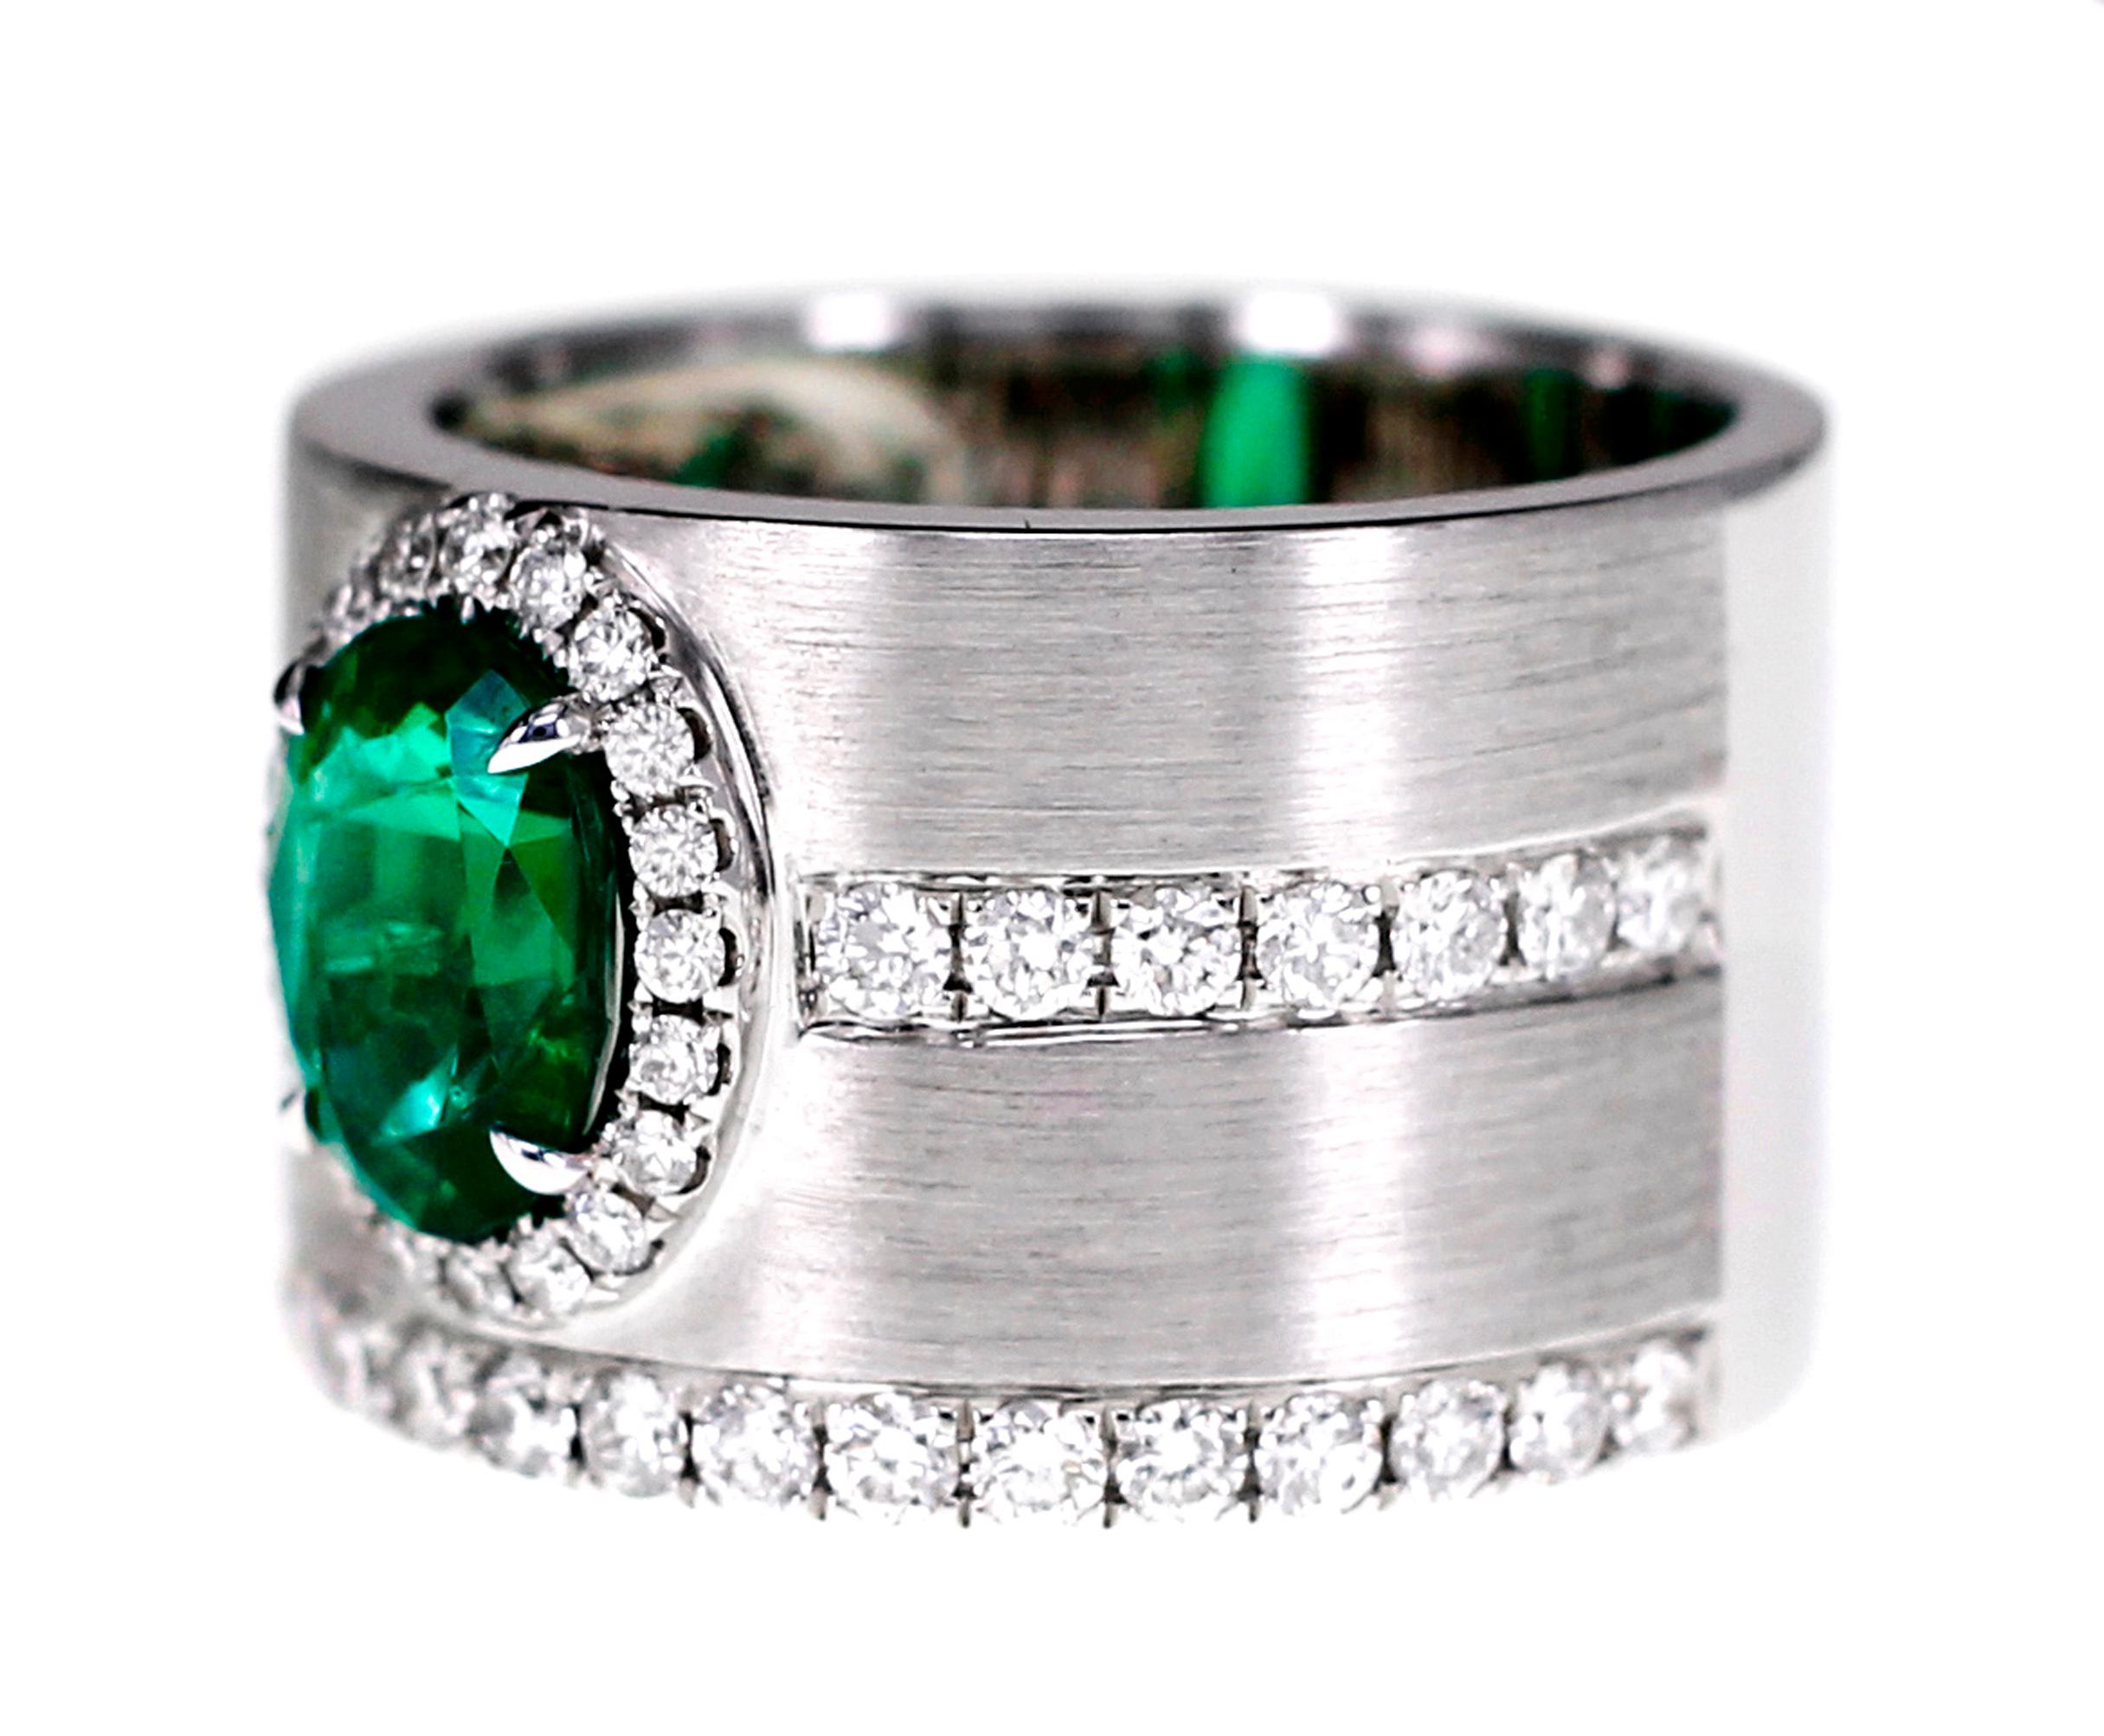 1.16 carat vivid green soothing emerald set in a Matt finish ring which can be feature in a hand made ring. Also the emerald is accompanied by 0.82 carats of white round brilliant cut diamond. The details of the diamond are as follows:
Color: